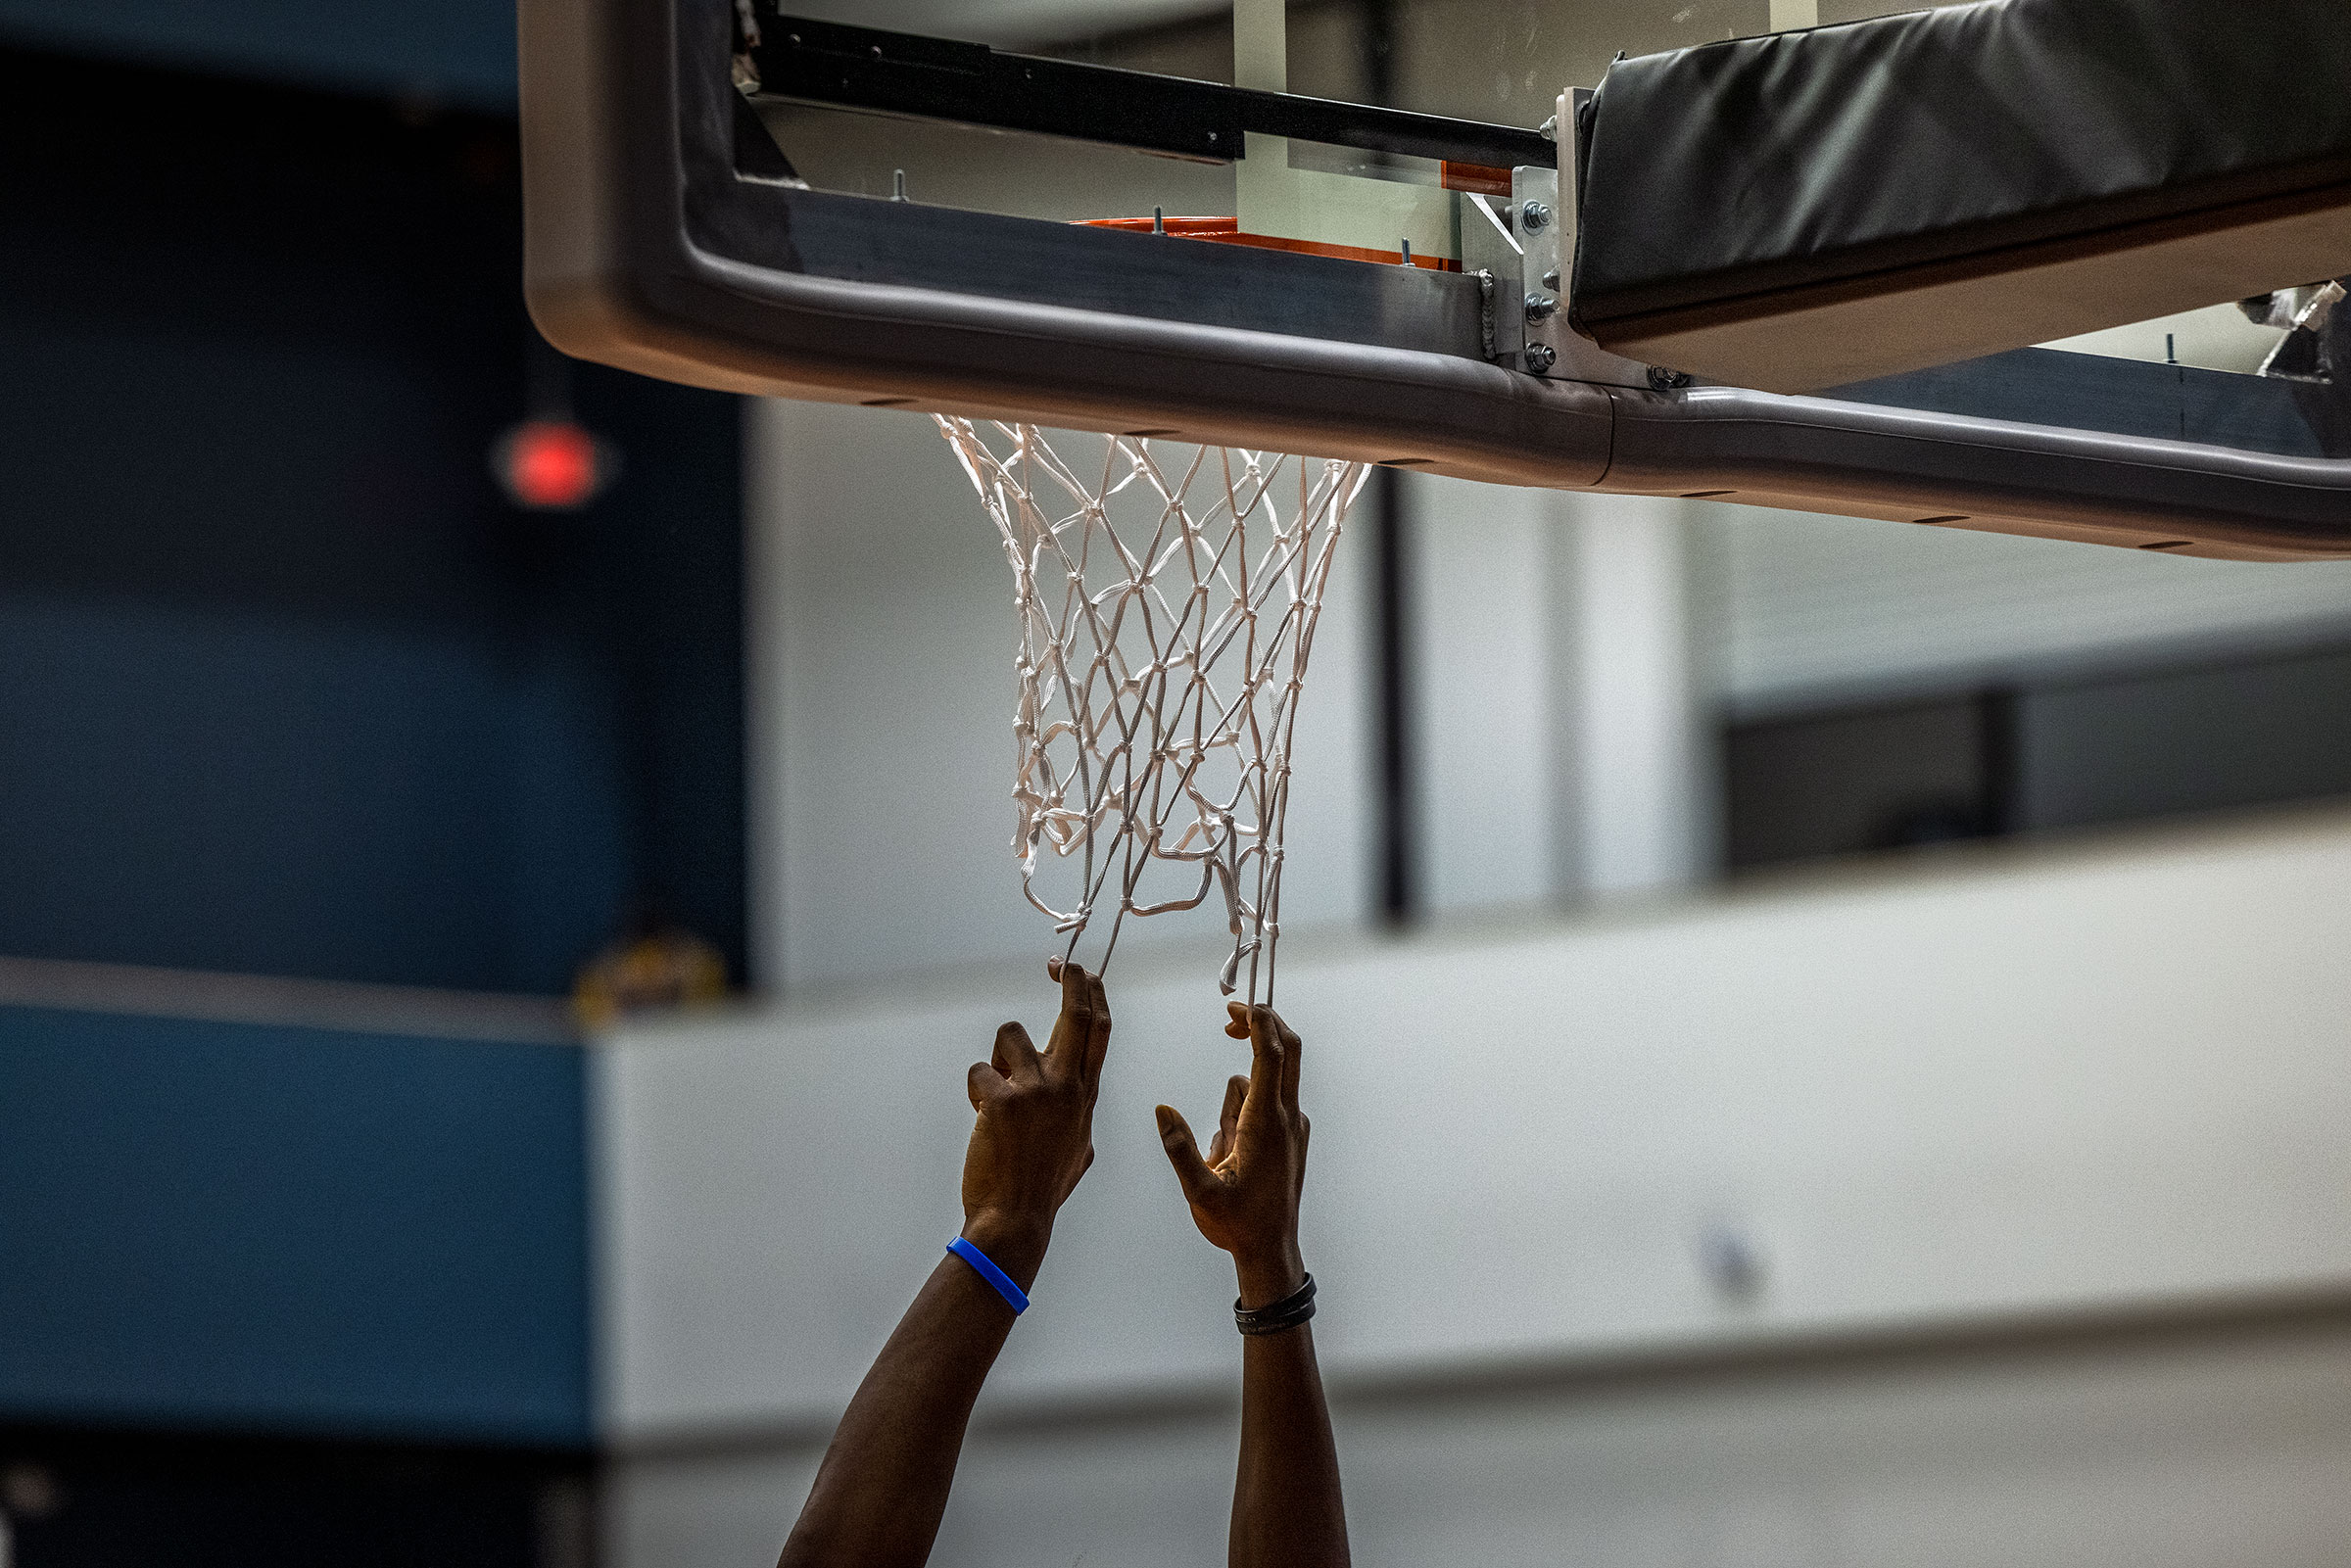 A player hangs onto the net at the OTE practice courts. (Andrew Hetherington for TIME)